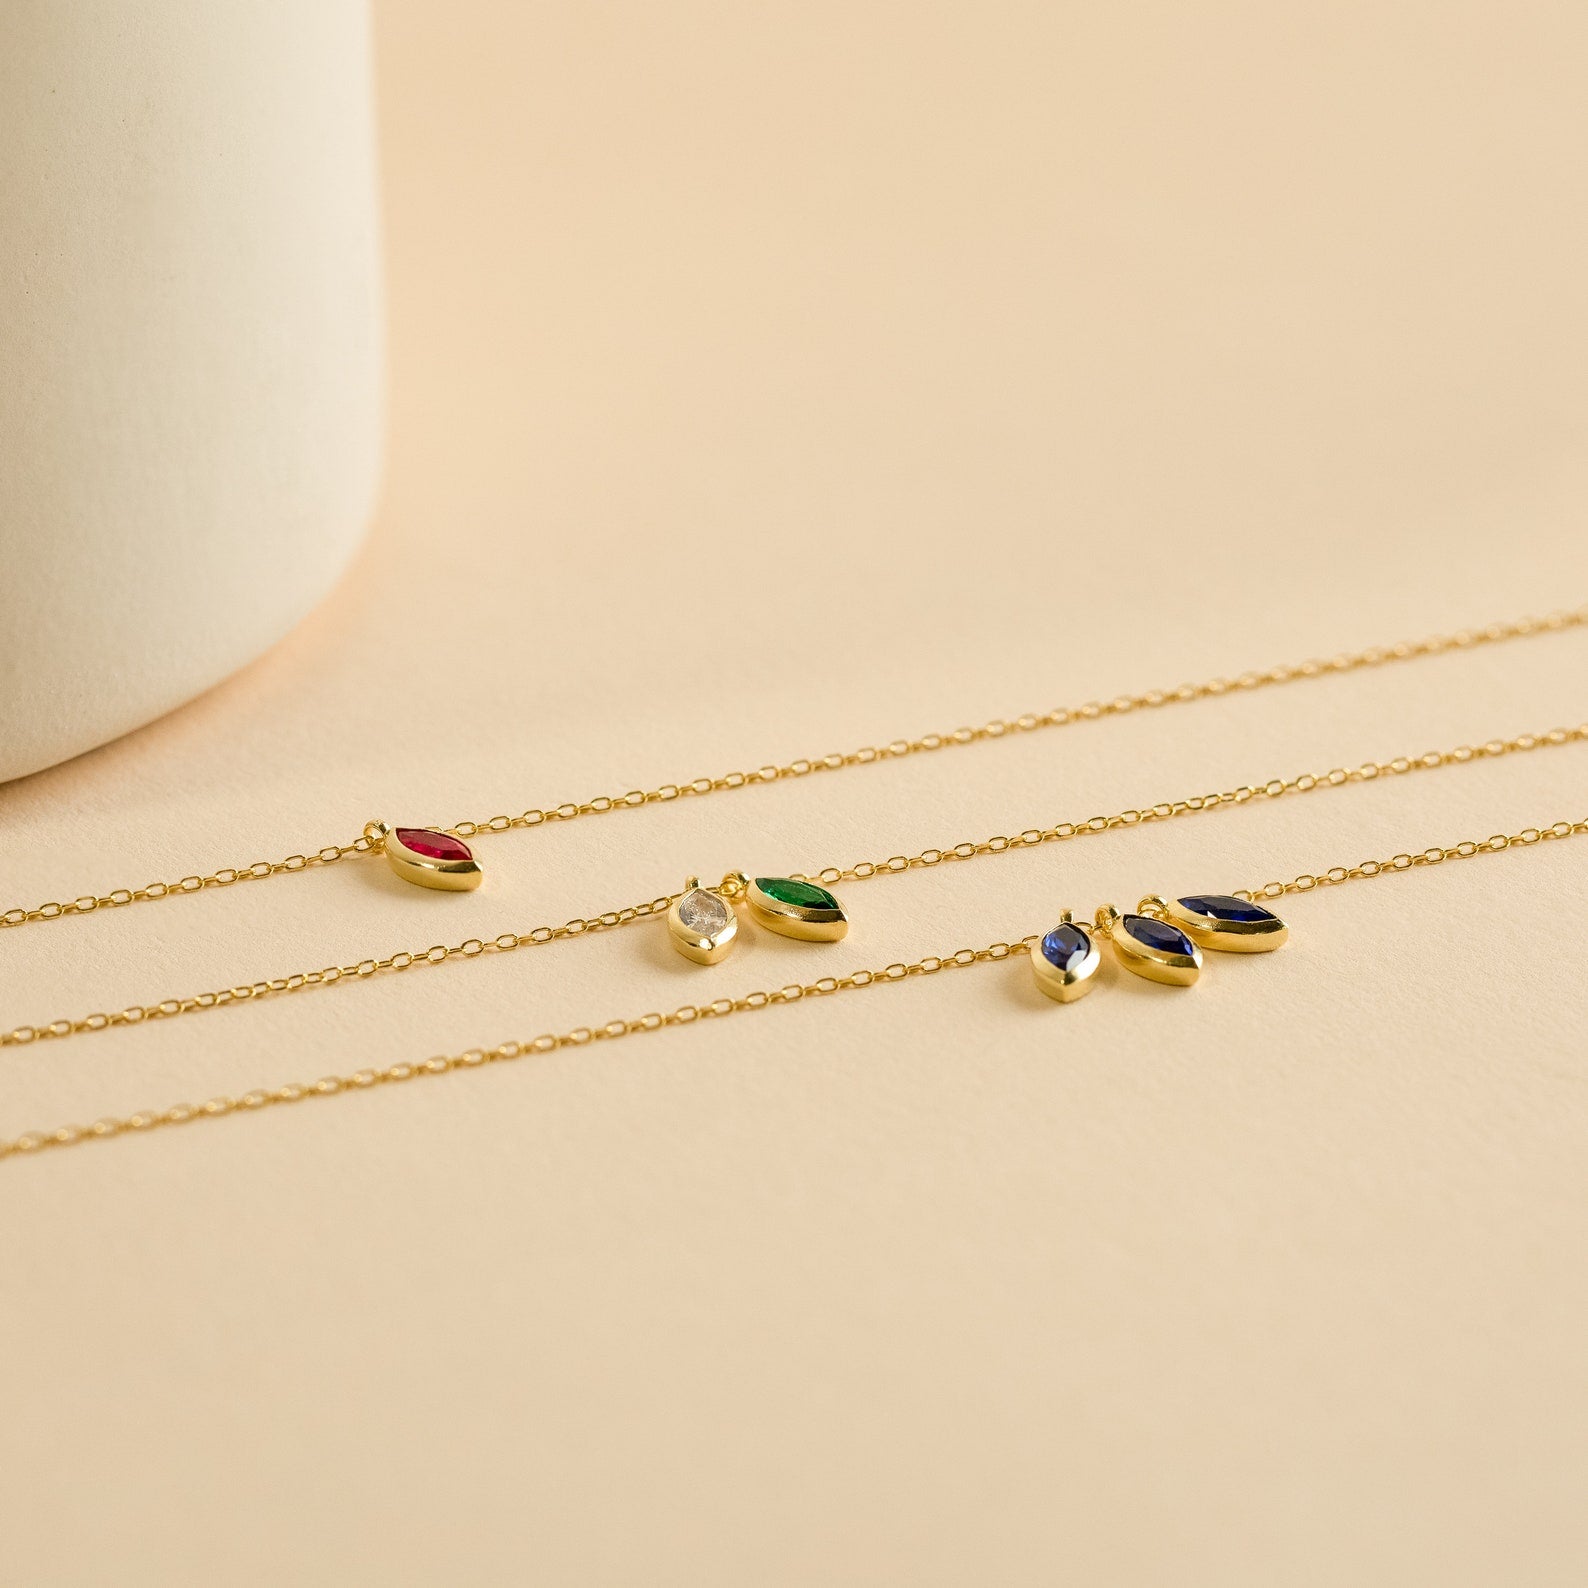 Marquise Birthstone Pendant Necklace